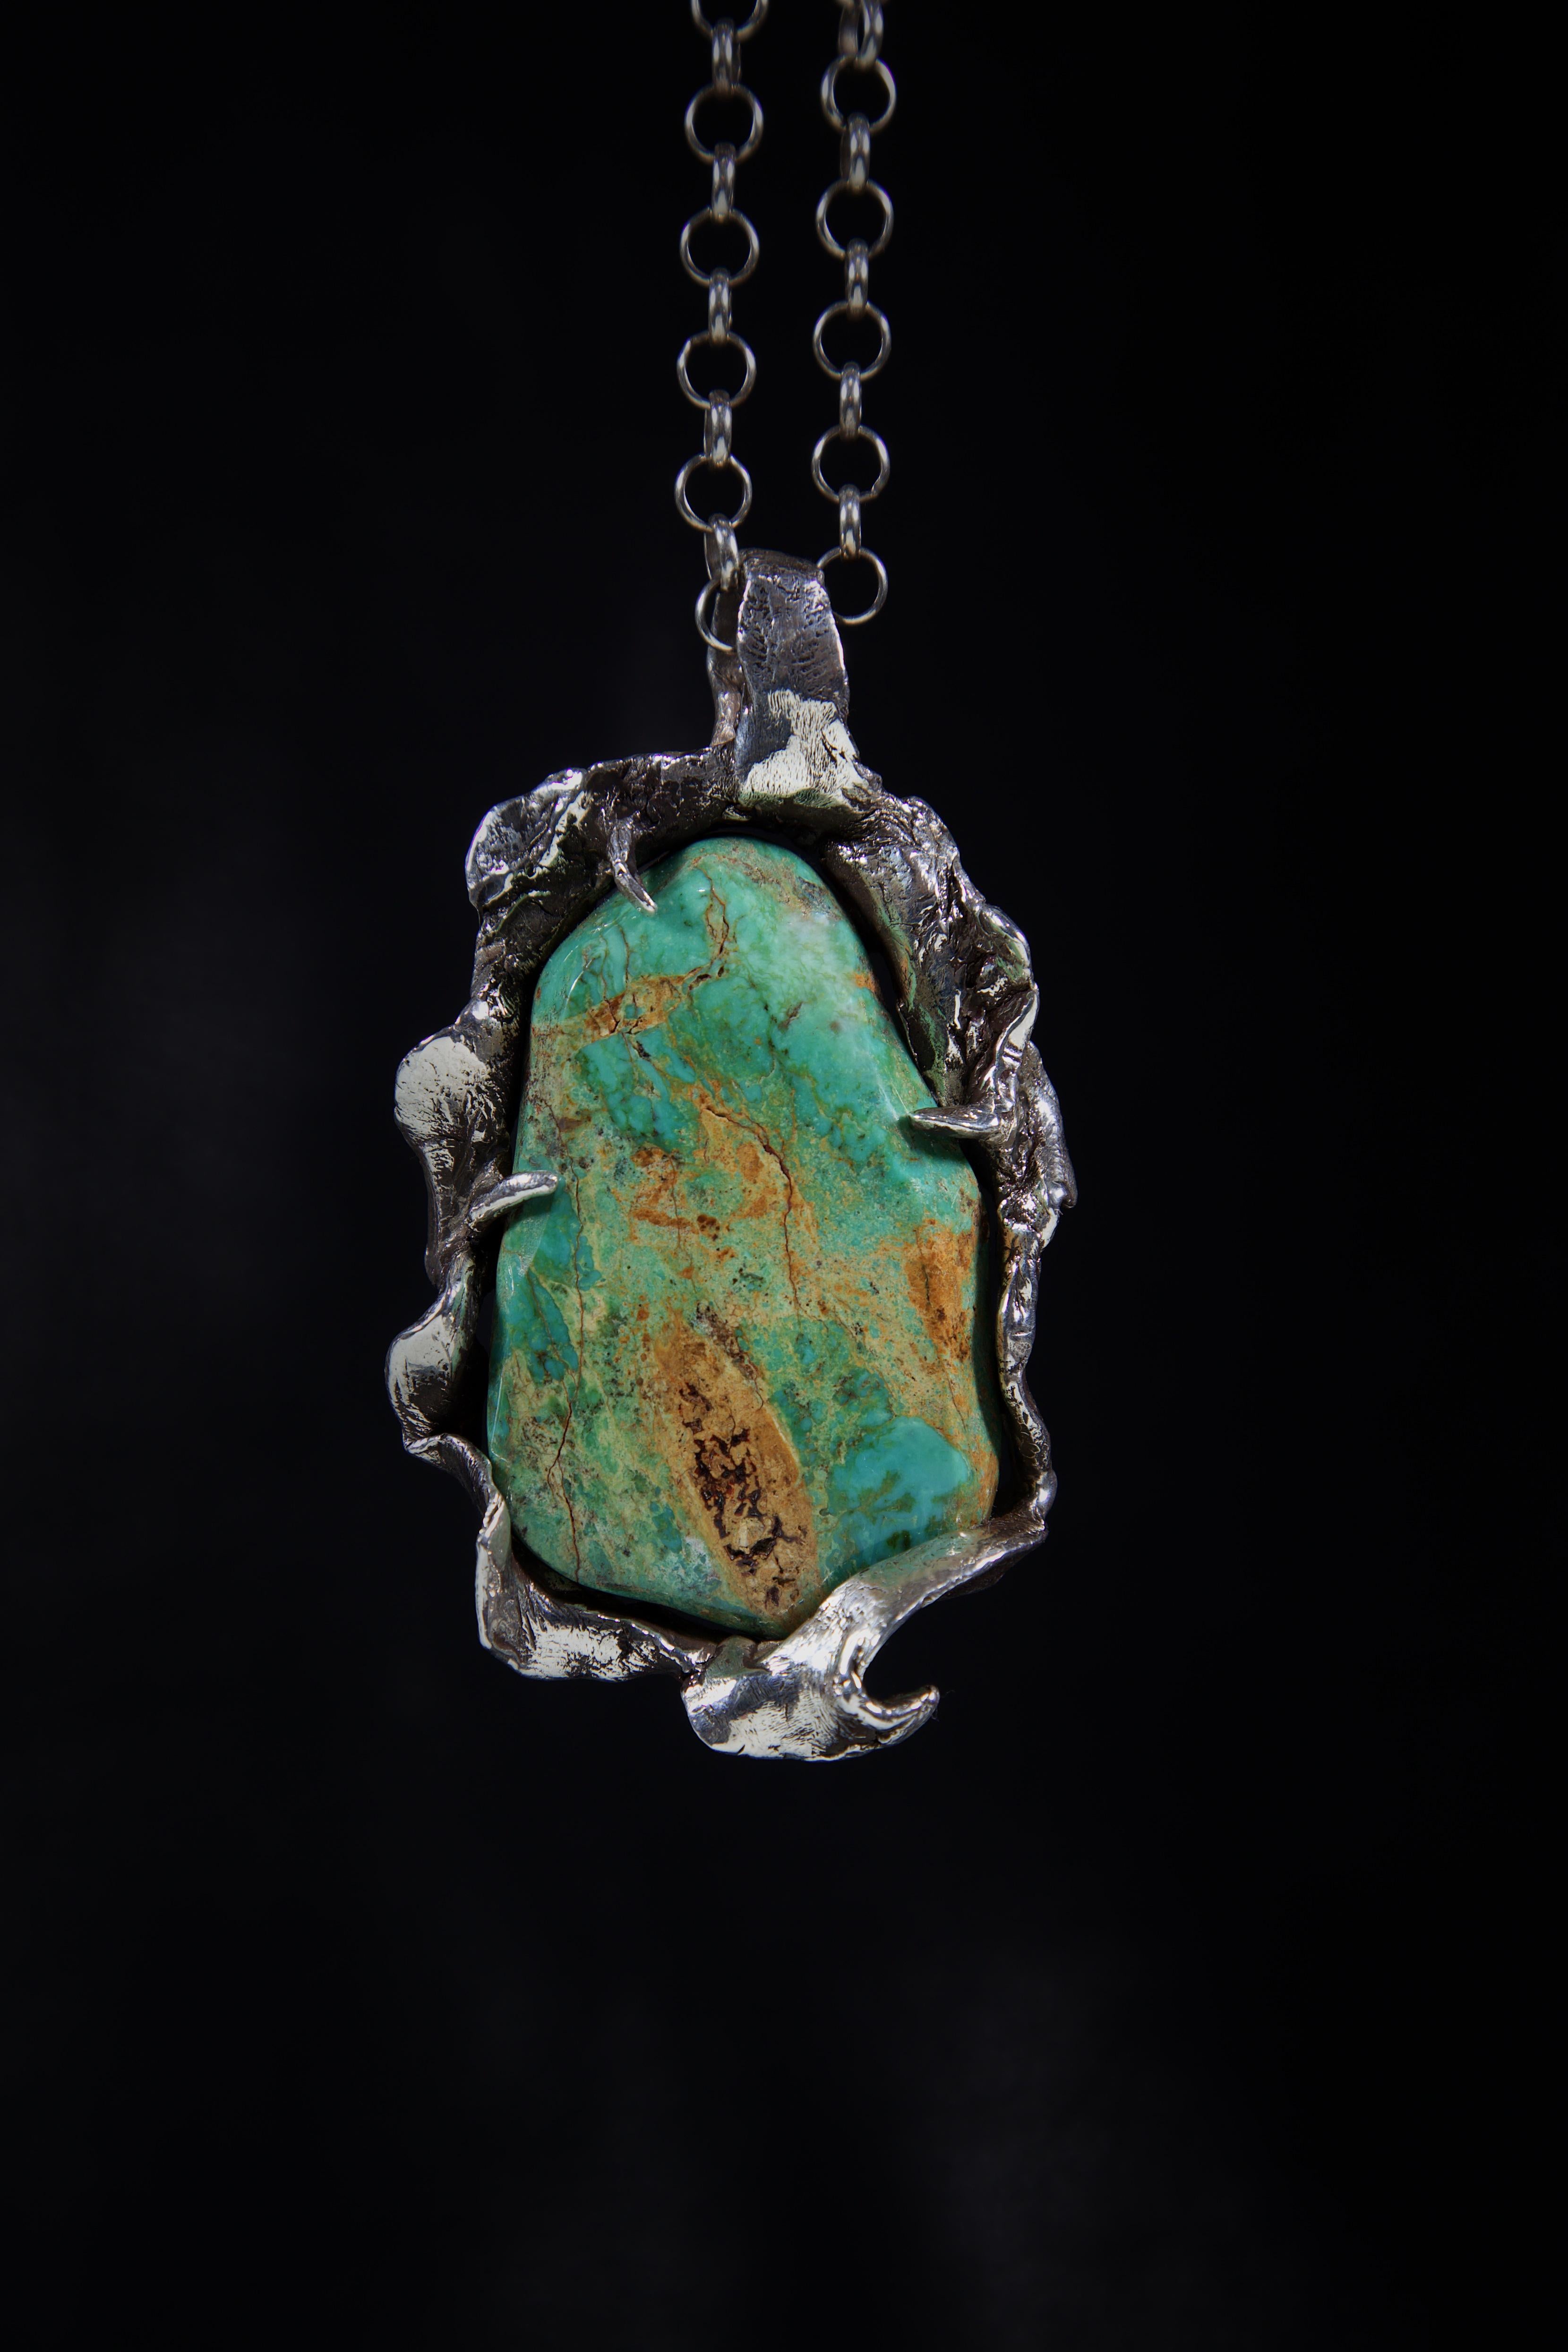 View from the Sky is a one-of-a-kind piece by Ken Fury that is hand-carved and cast in sterling silver.

Stones: King’s Manassa Turquoise 

Size of piece: 45mm x 82mm

The stone is large and is 53mm x 34mm

Hand-signed.

A 24-inch sterling silver